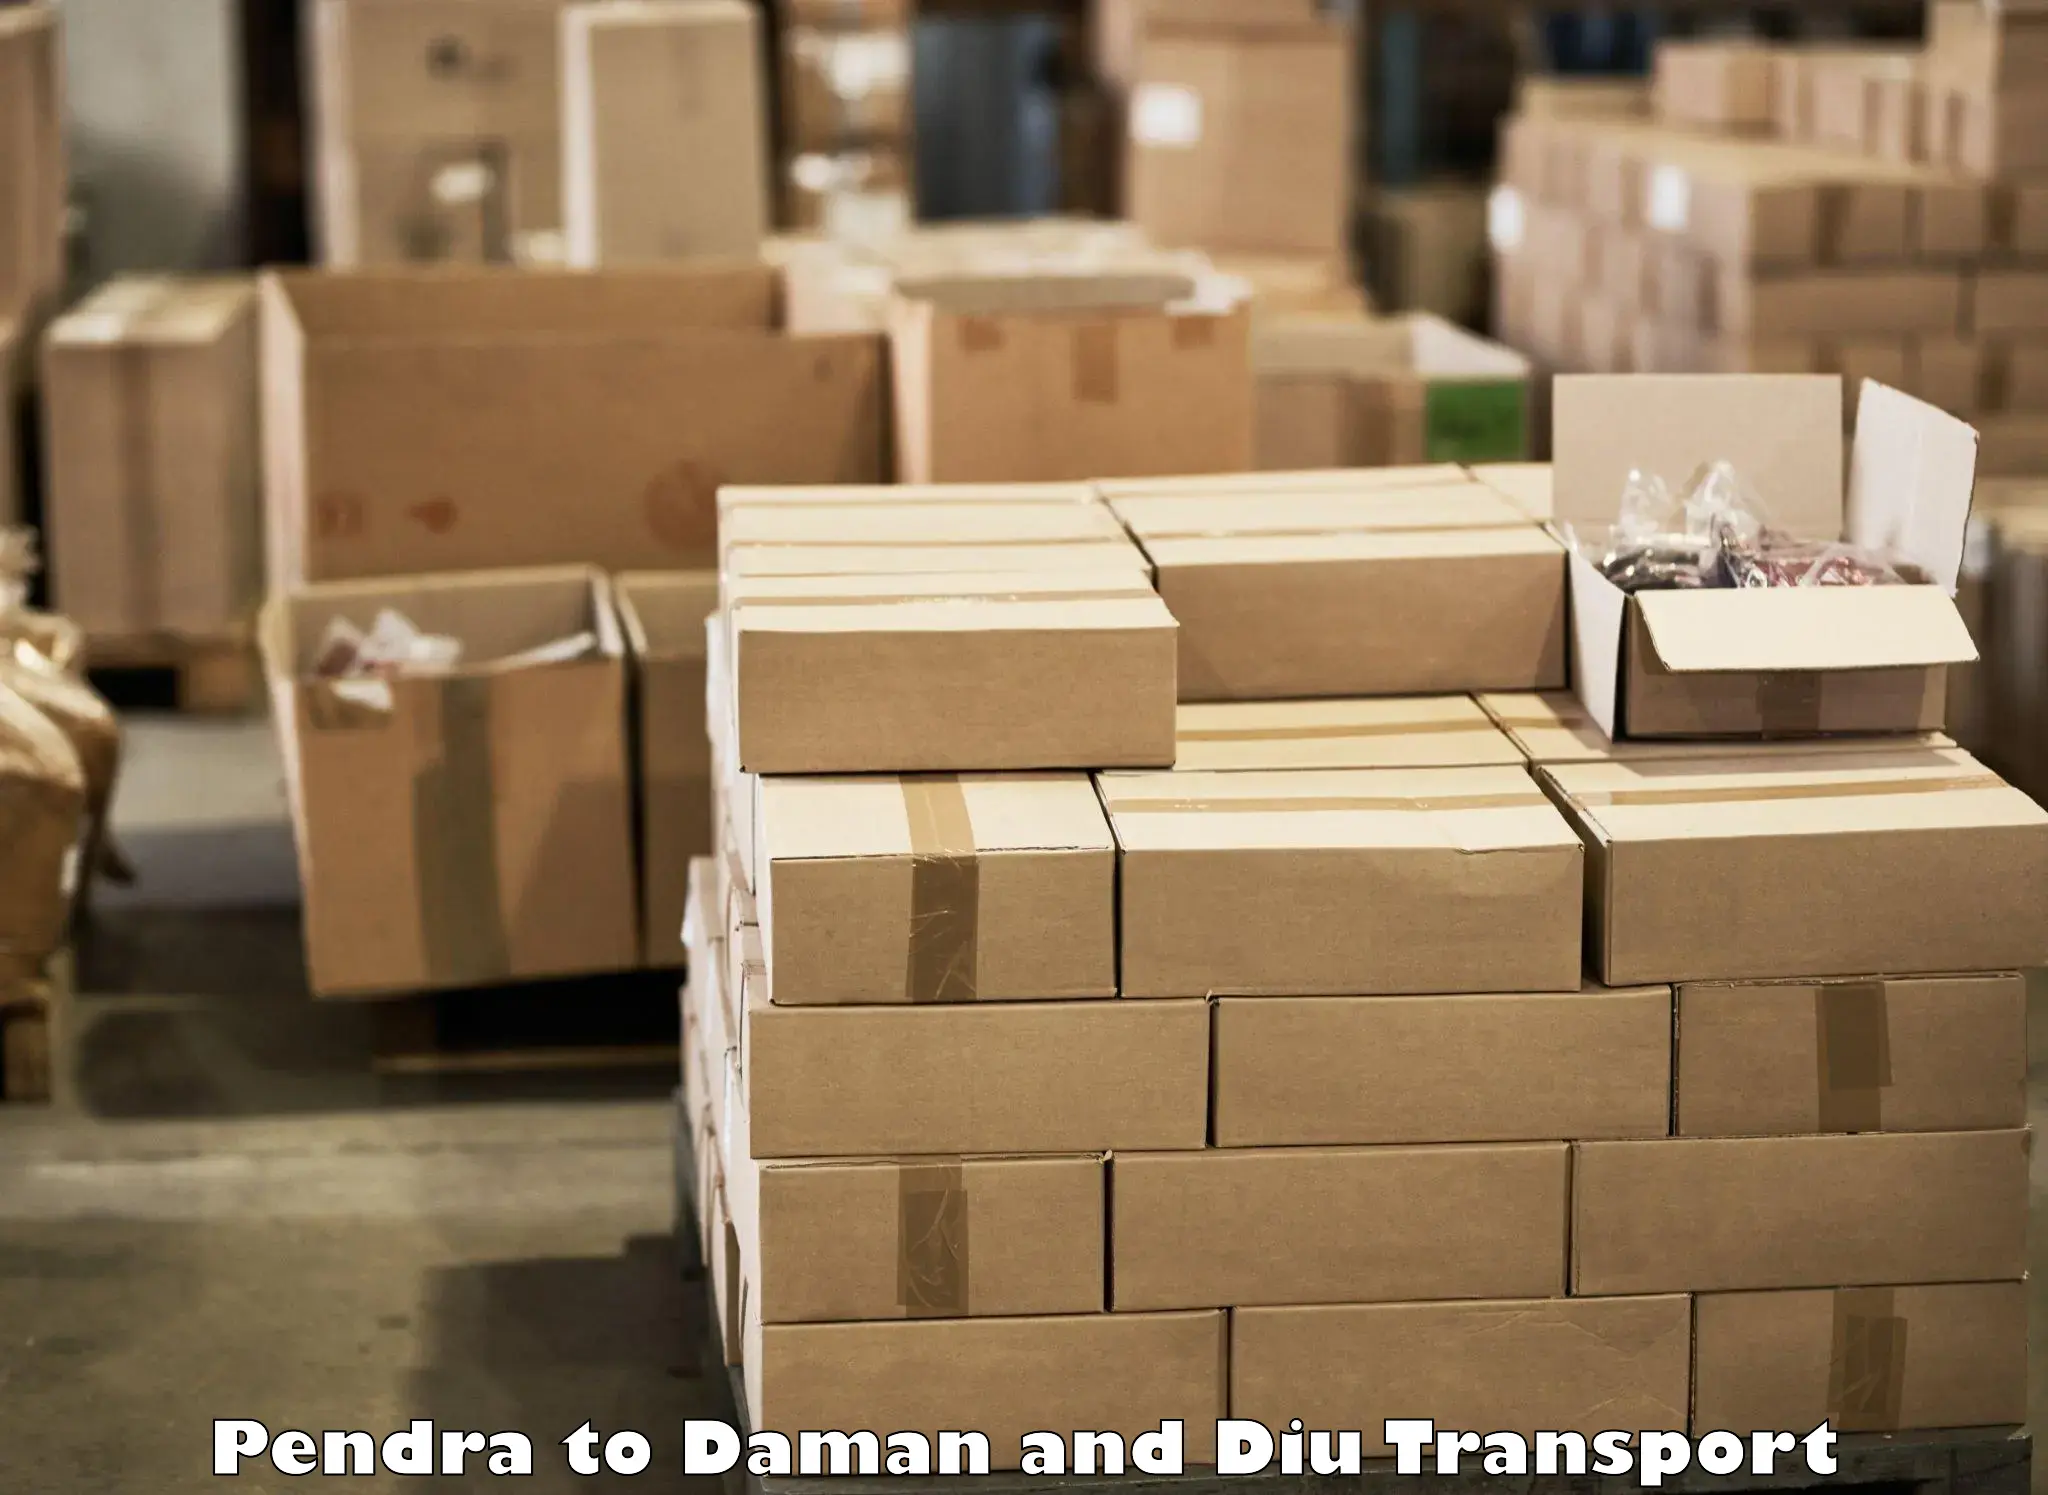 Daily parcel service transport in Pendra to Daman and Diu